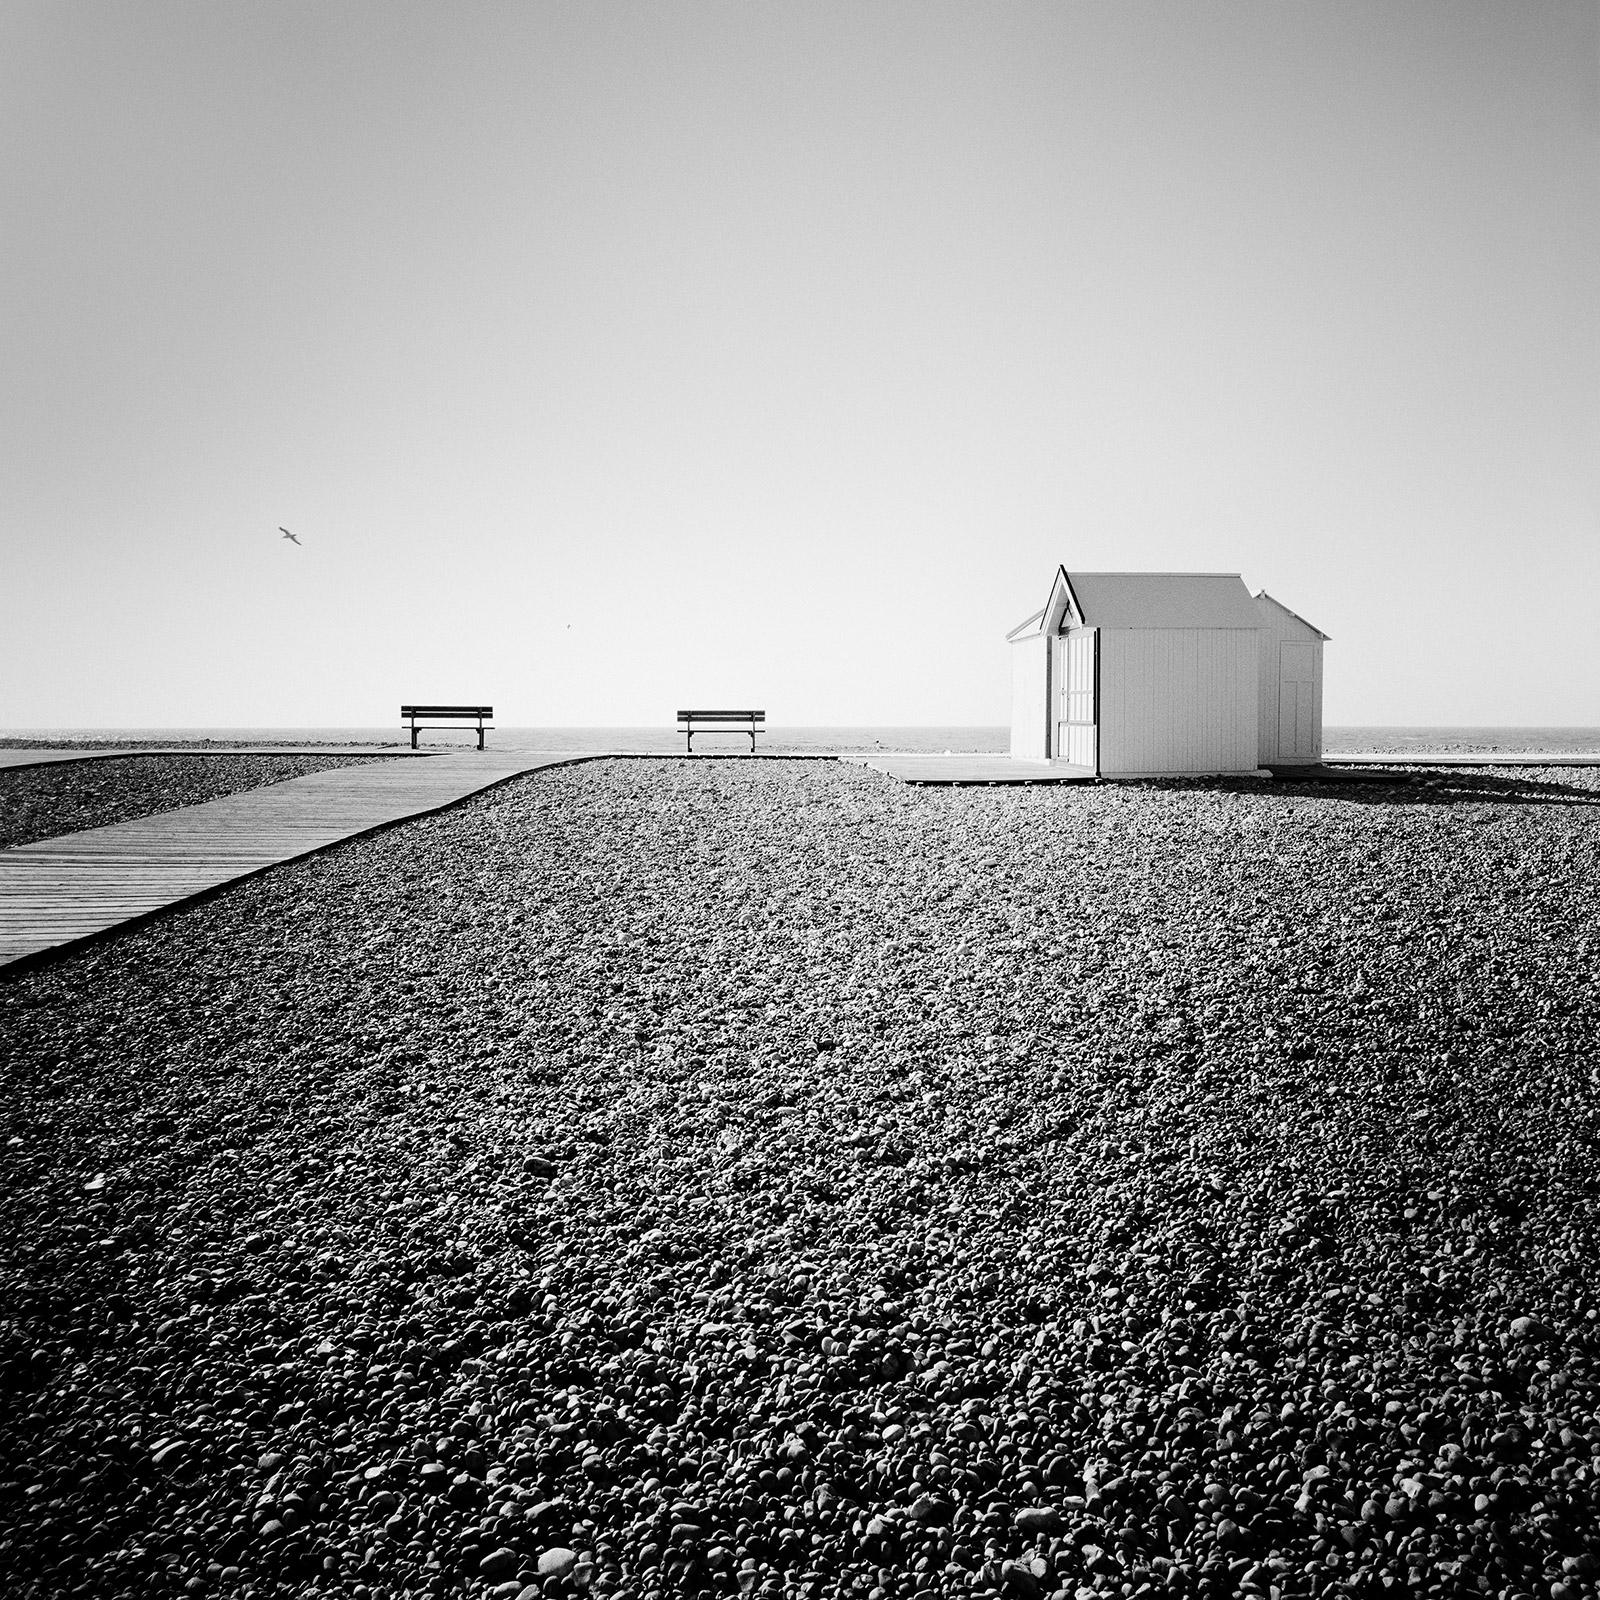 Beach Huts, Rocky Beach, Bench, France, black and white photography, landscape